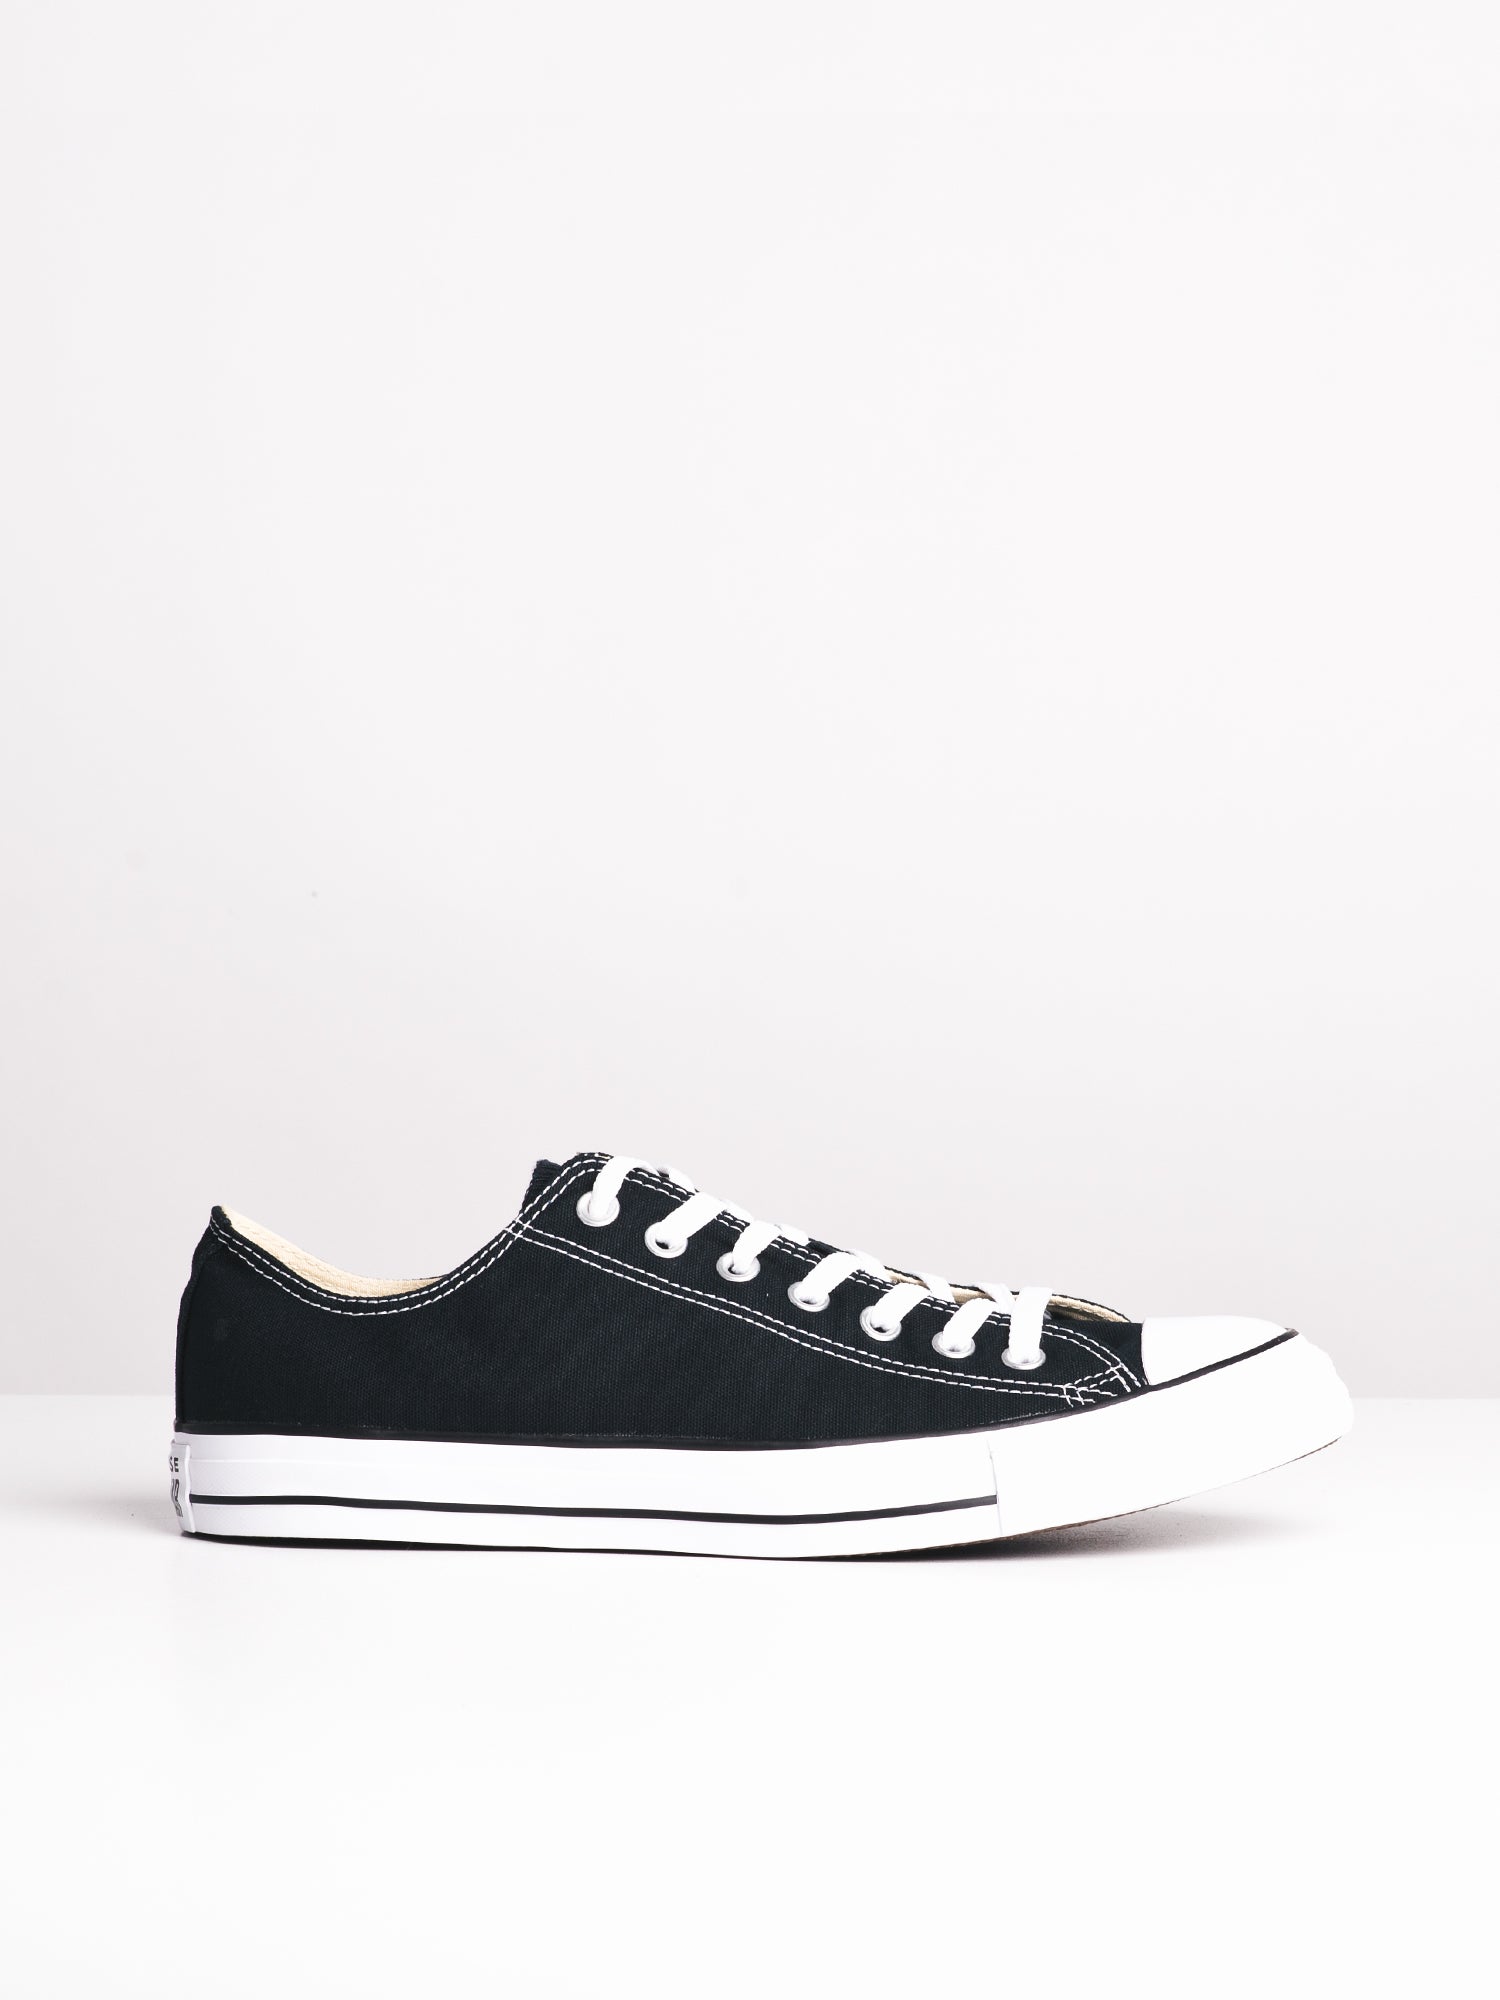 Converse CORE CHUCK TAYLOR ALL STAR Canvas Shoe For Men - Buy Converse CORE  CHUCK TAYLOR ALL STAR Canvas Shoe For Men Online at Best Price - Shop  Online for Footwears in